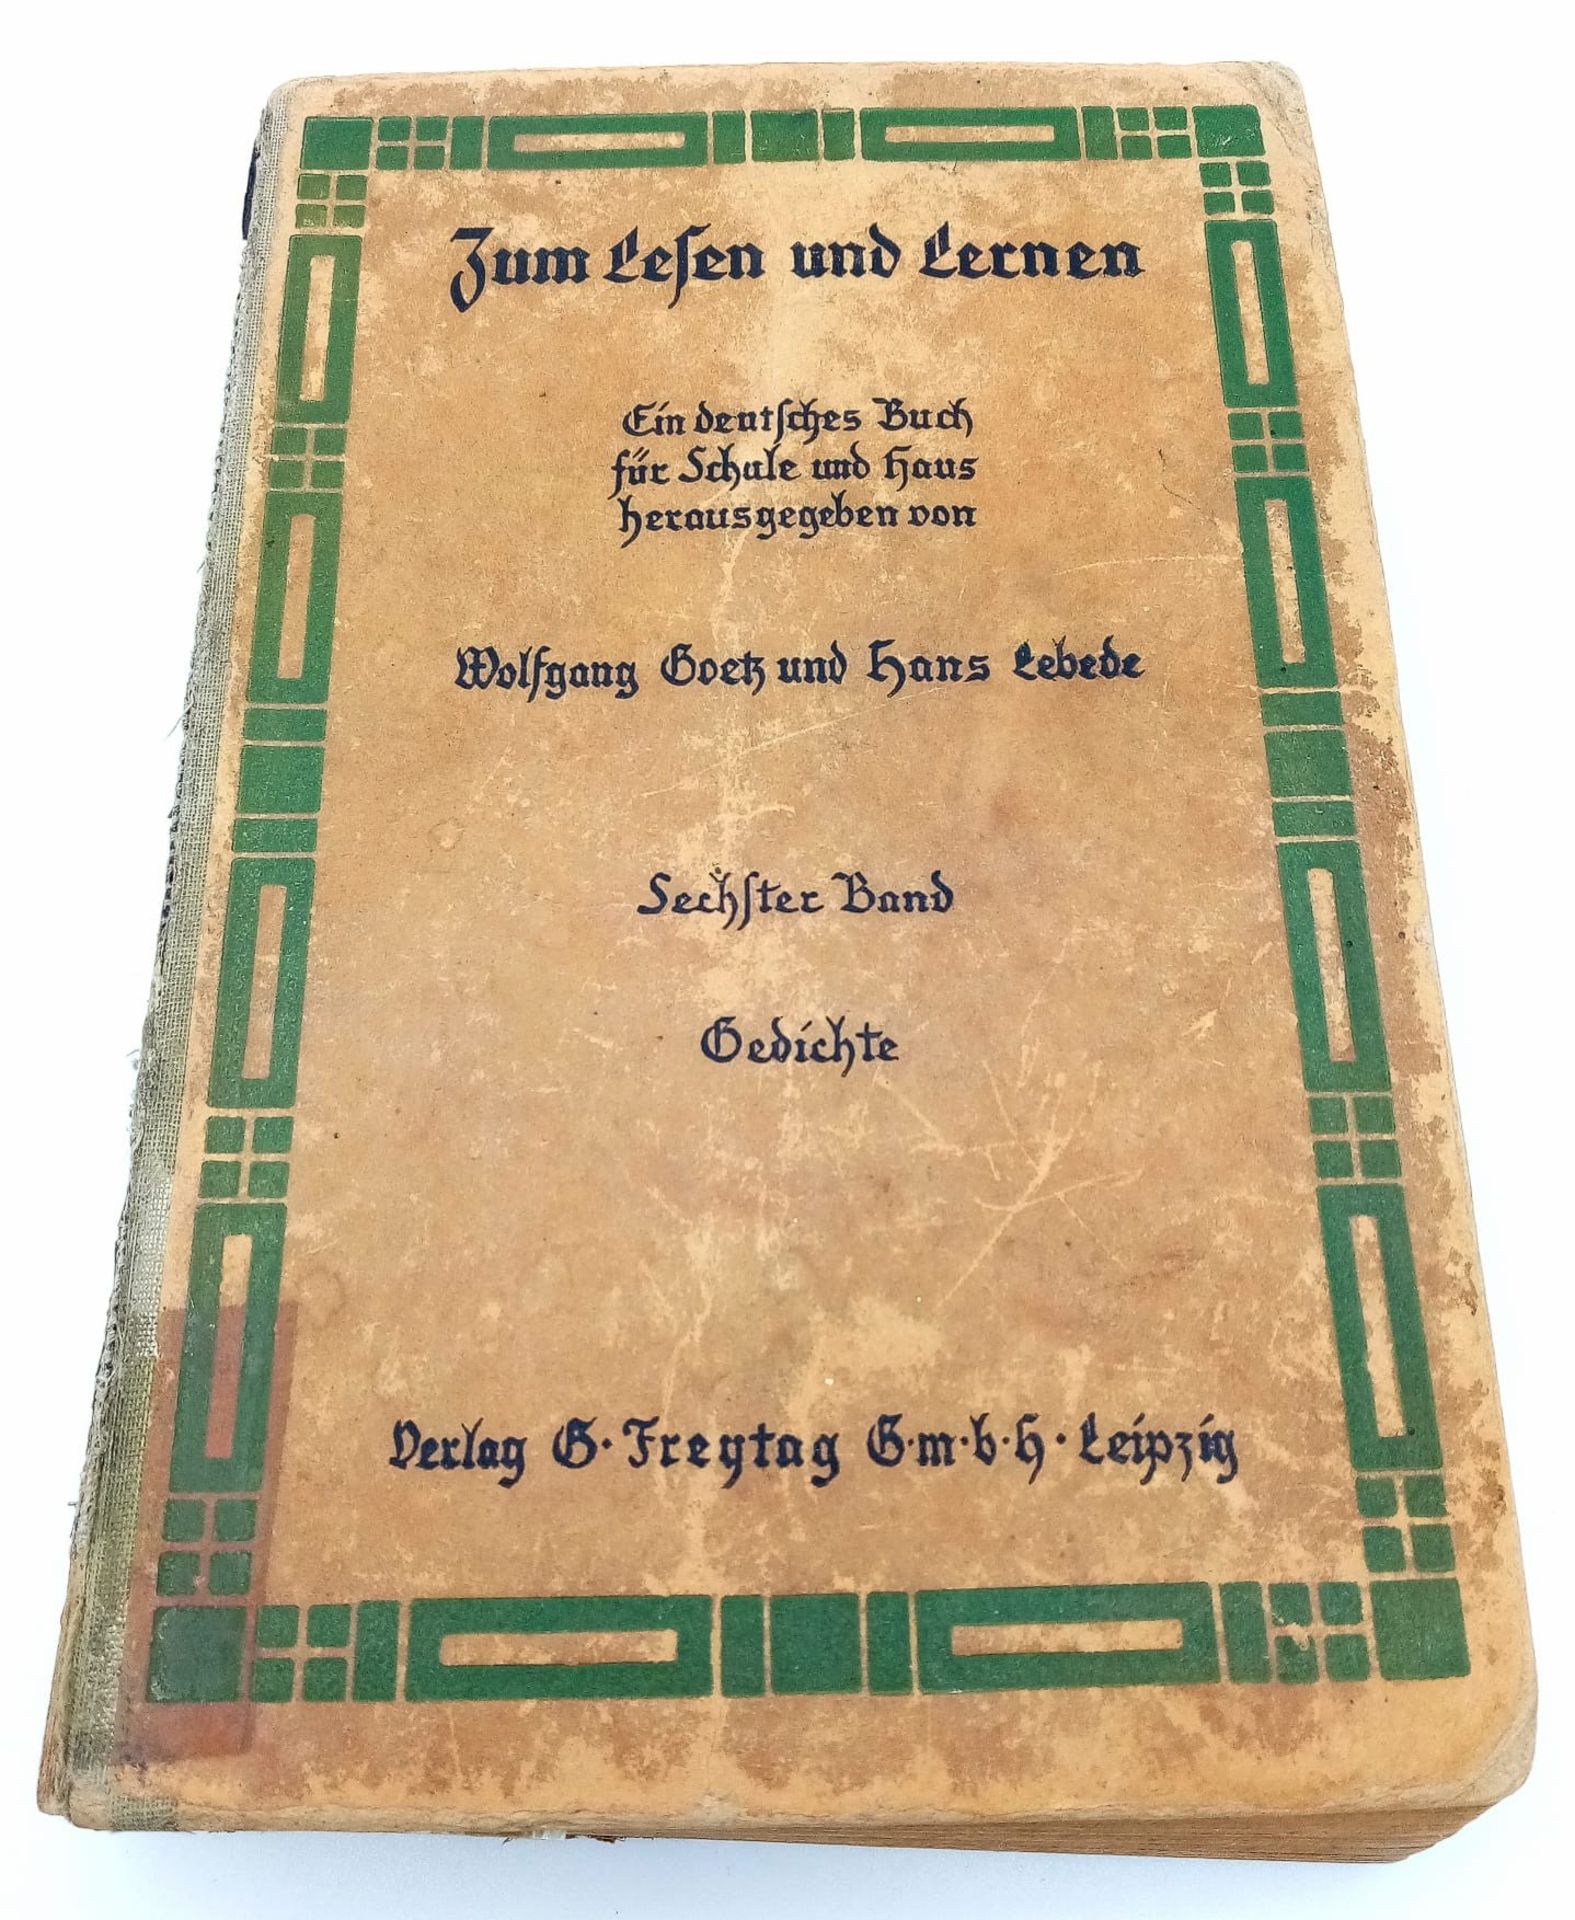 A WW2 German Book from a Kriegsmarine U-Boat Library. Each boat had a box of books and would